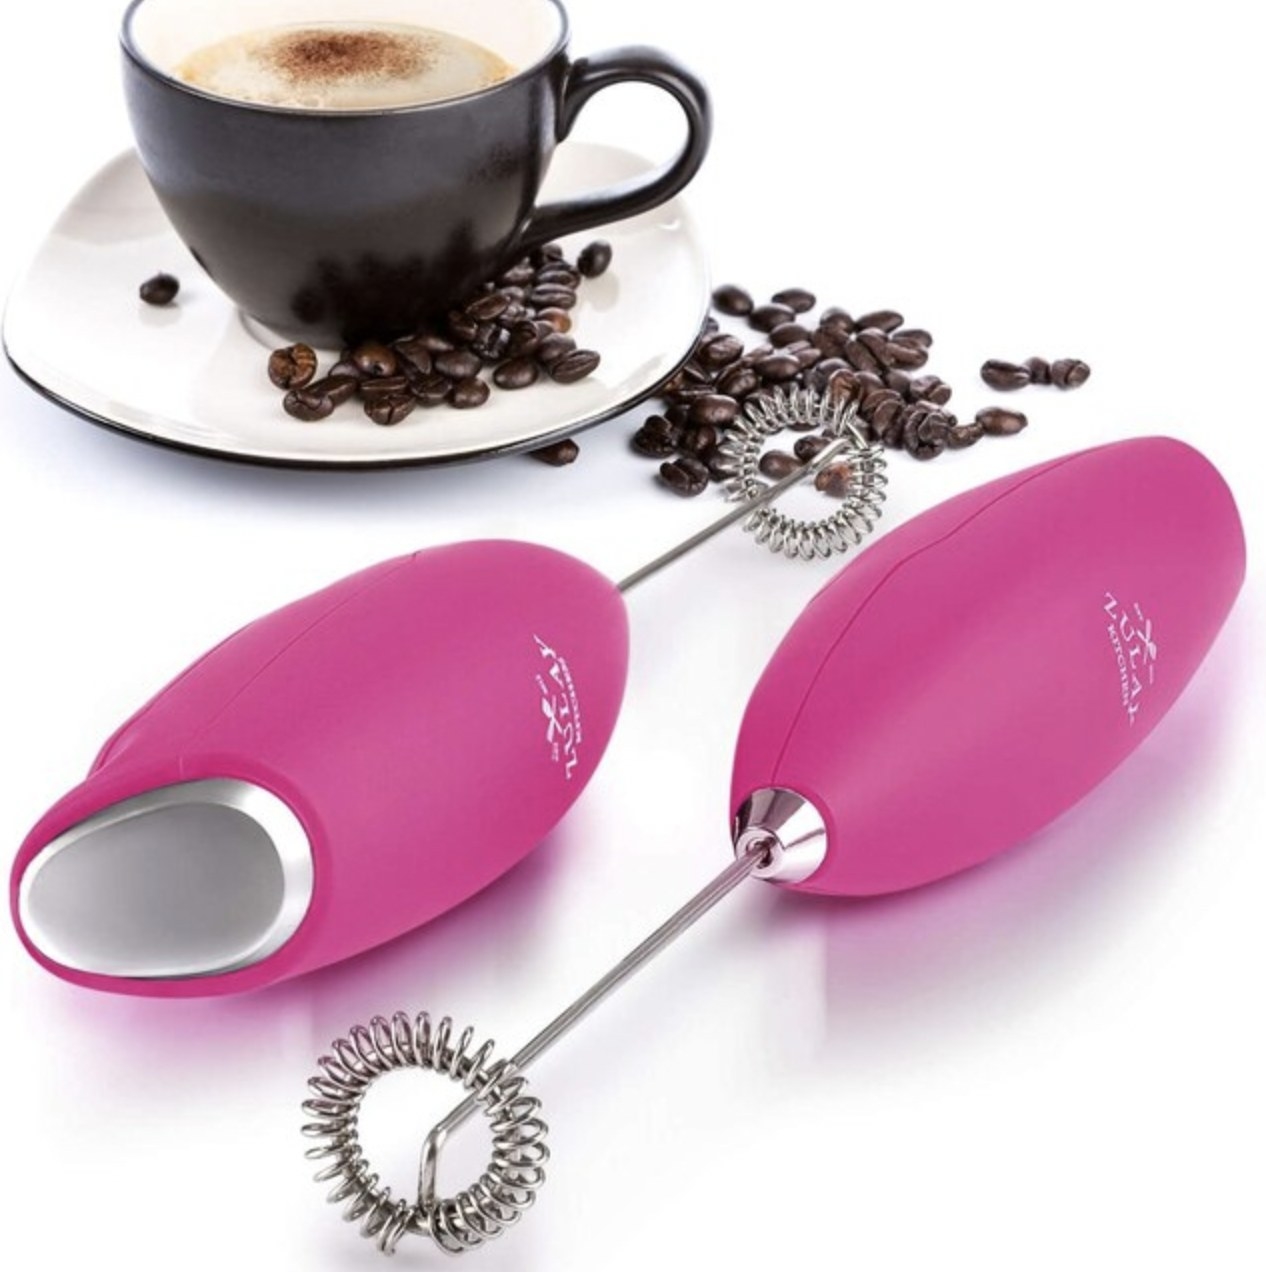 The pink frother next to latte with coffee beans spread out on table